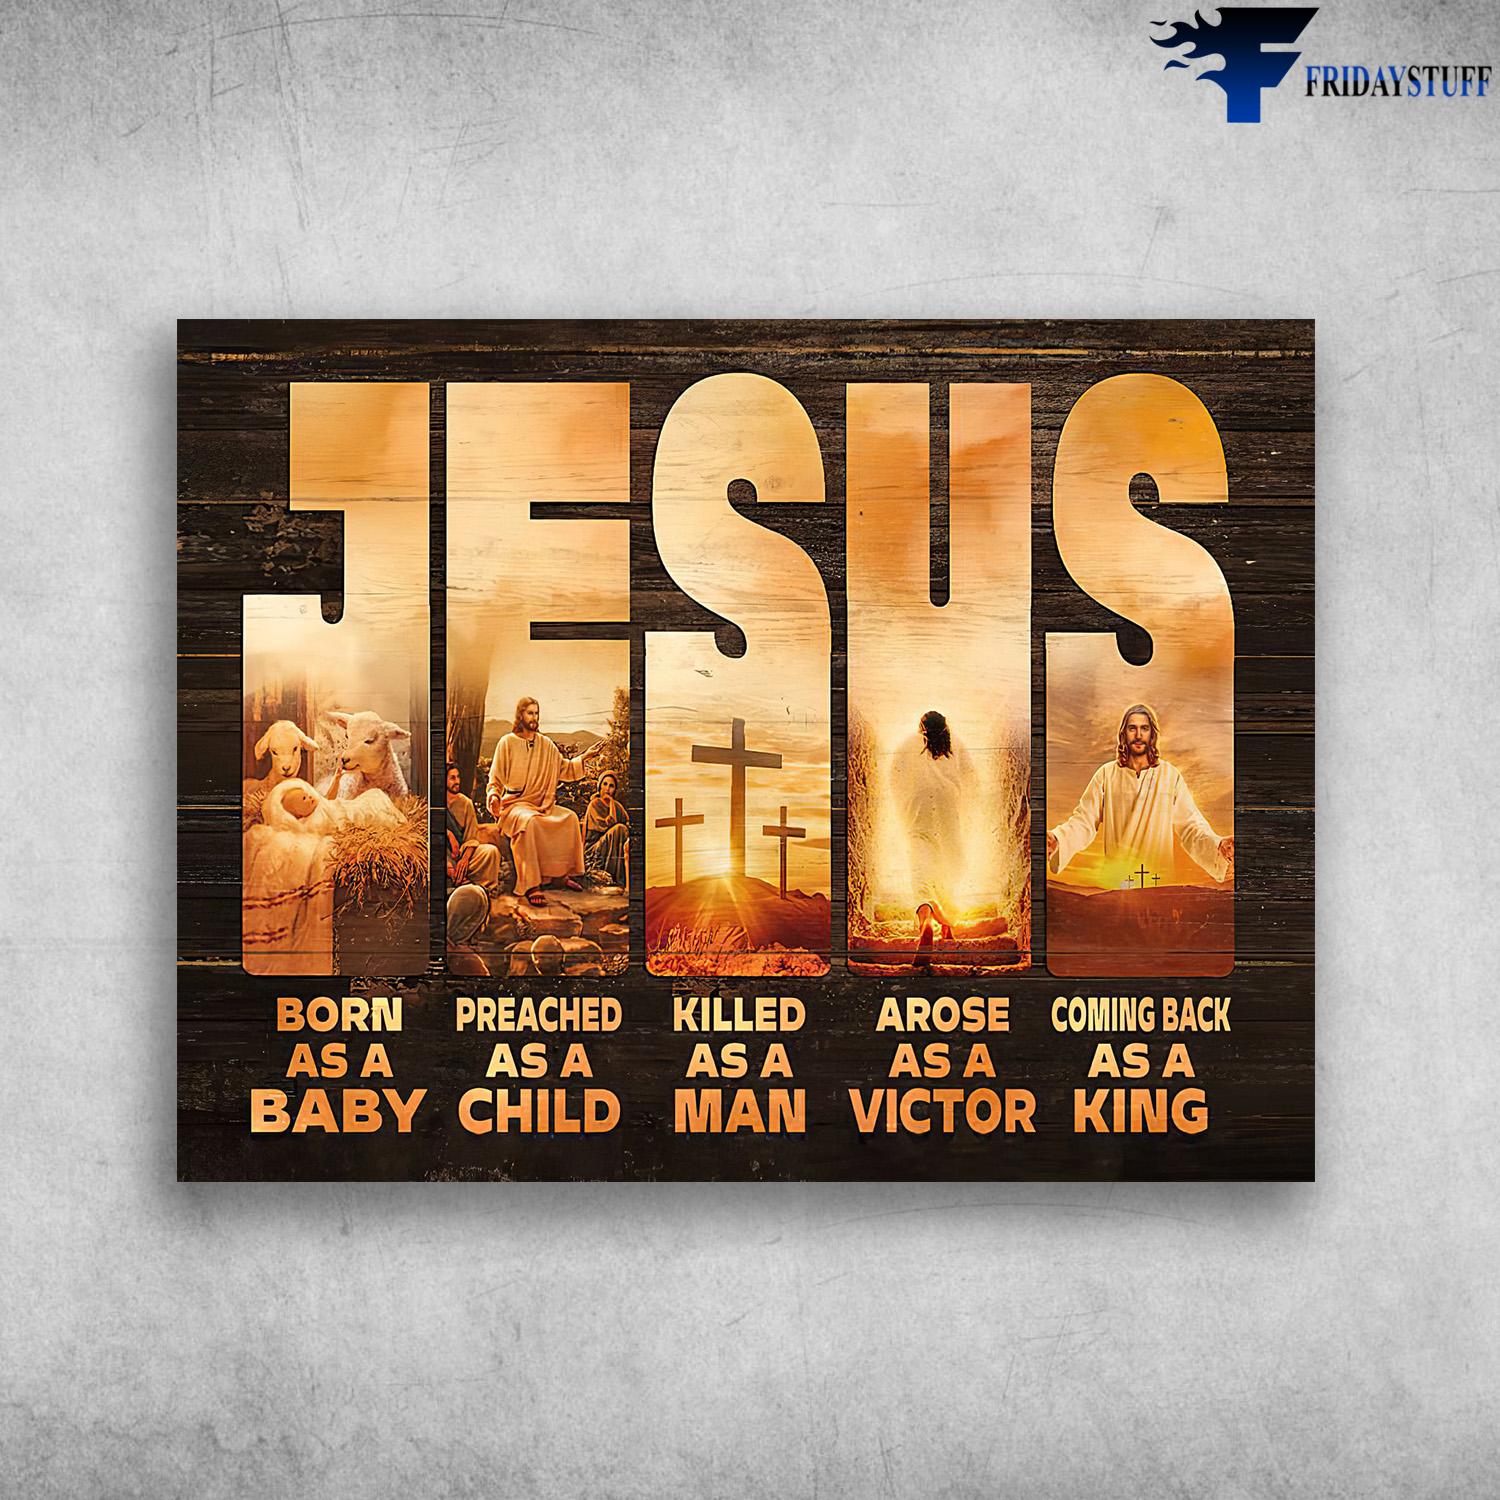 Jesus Poster, Merry Christmas - Jesus Burn As A Baby, Preached As A Child, Killed As A Man, Arose As A Victor, Coming Back As A King